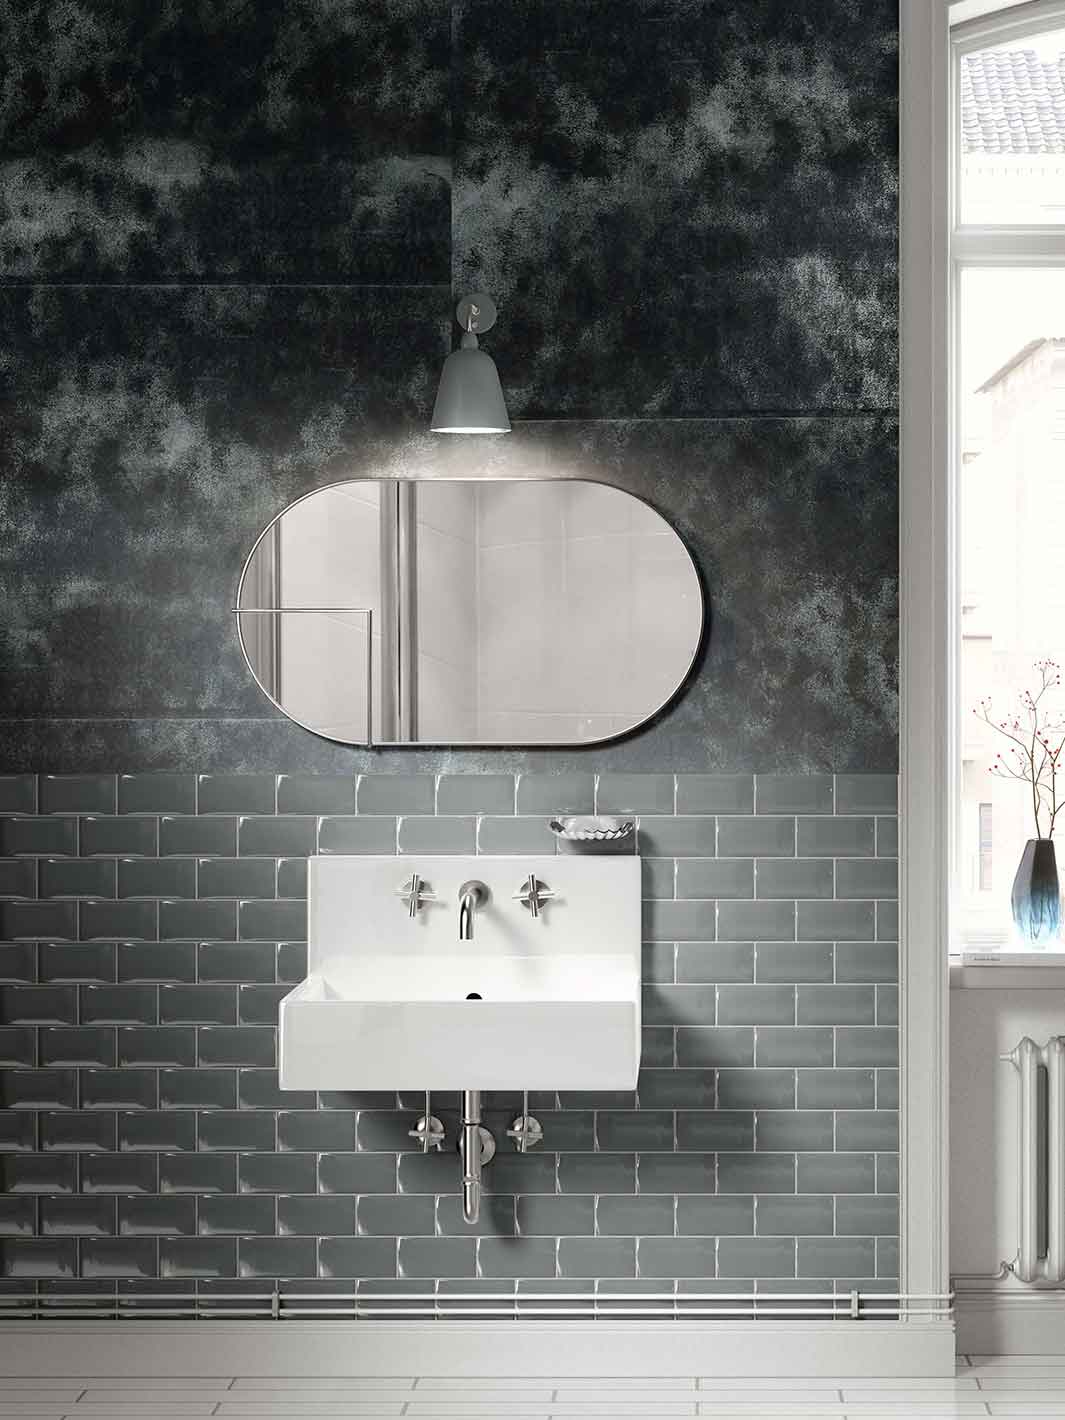 Aqualille Storm Wallpaper in Slate Gray in Bathroom